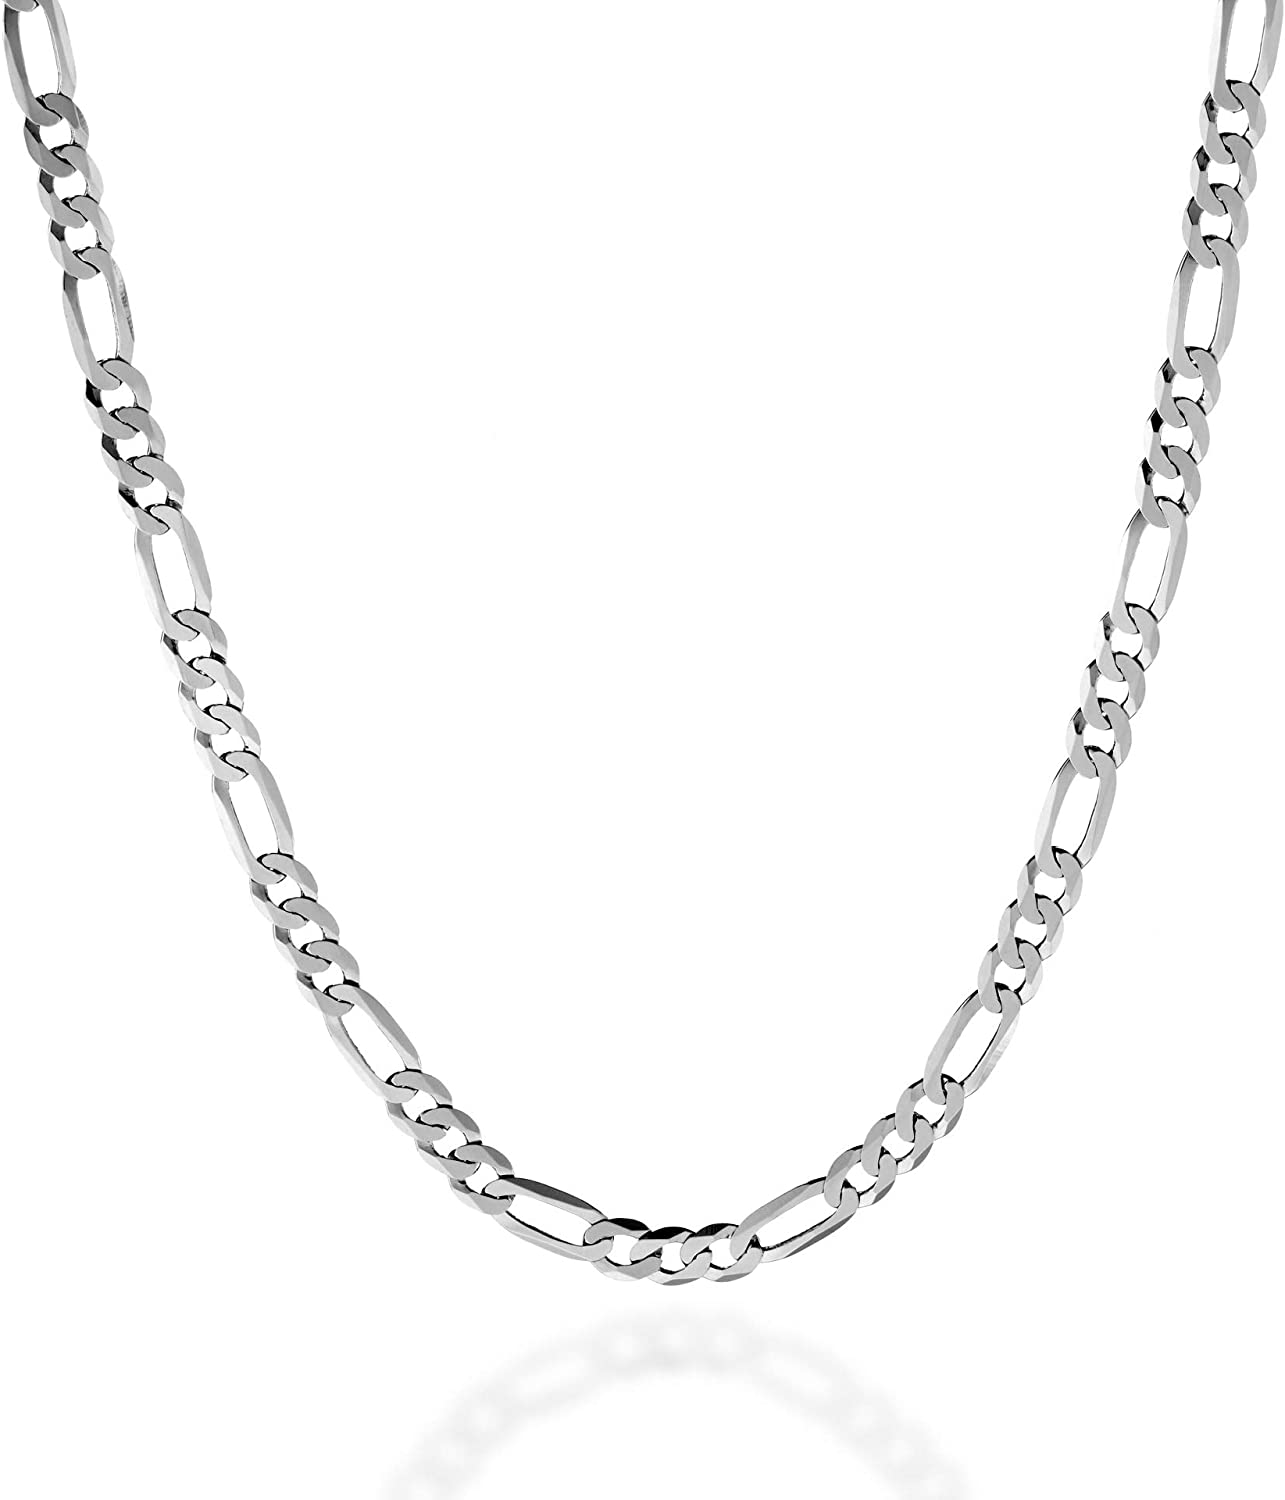 Chain in 925 Sterling Silver Italian 5MM Necklace for Women Men Girls Boys - 16 to 30 Inch - Premium Quality Made in Italy Certified - Gift Box Included